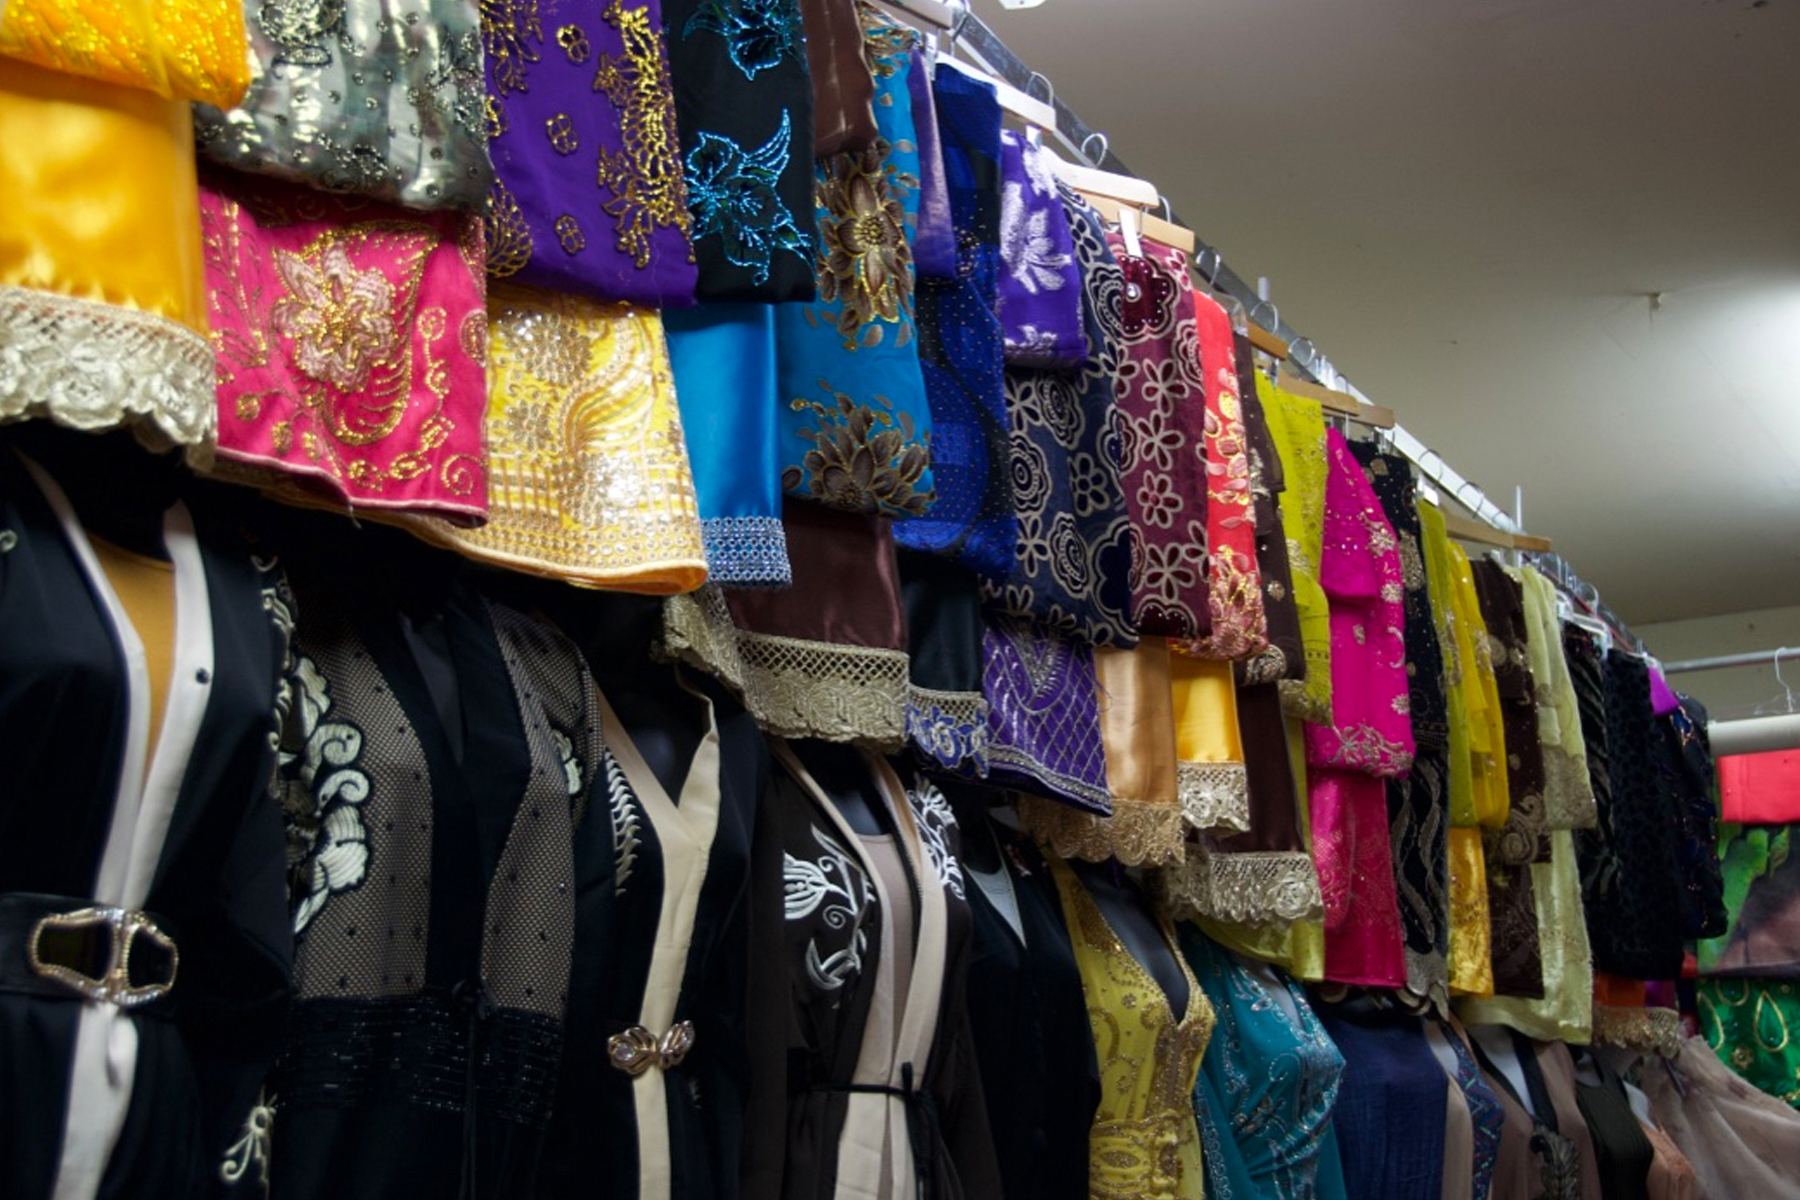 An array of colorful abaya, a style of dress worn by many Muslim women, line one wall of this market stall